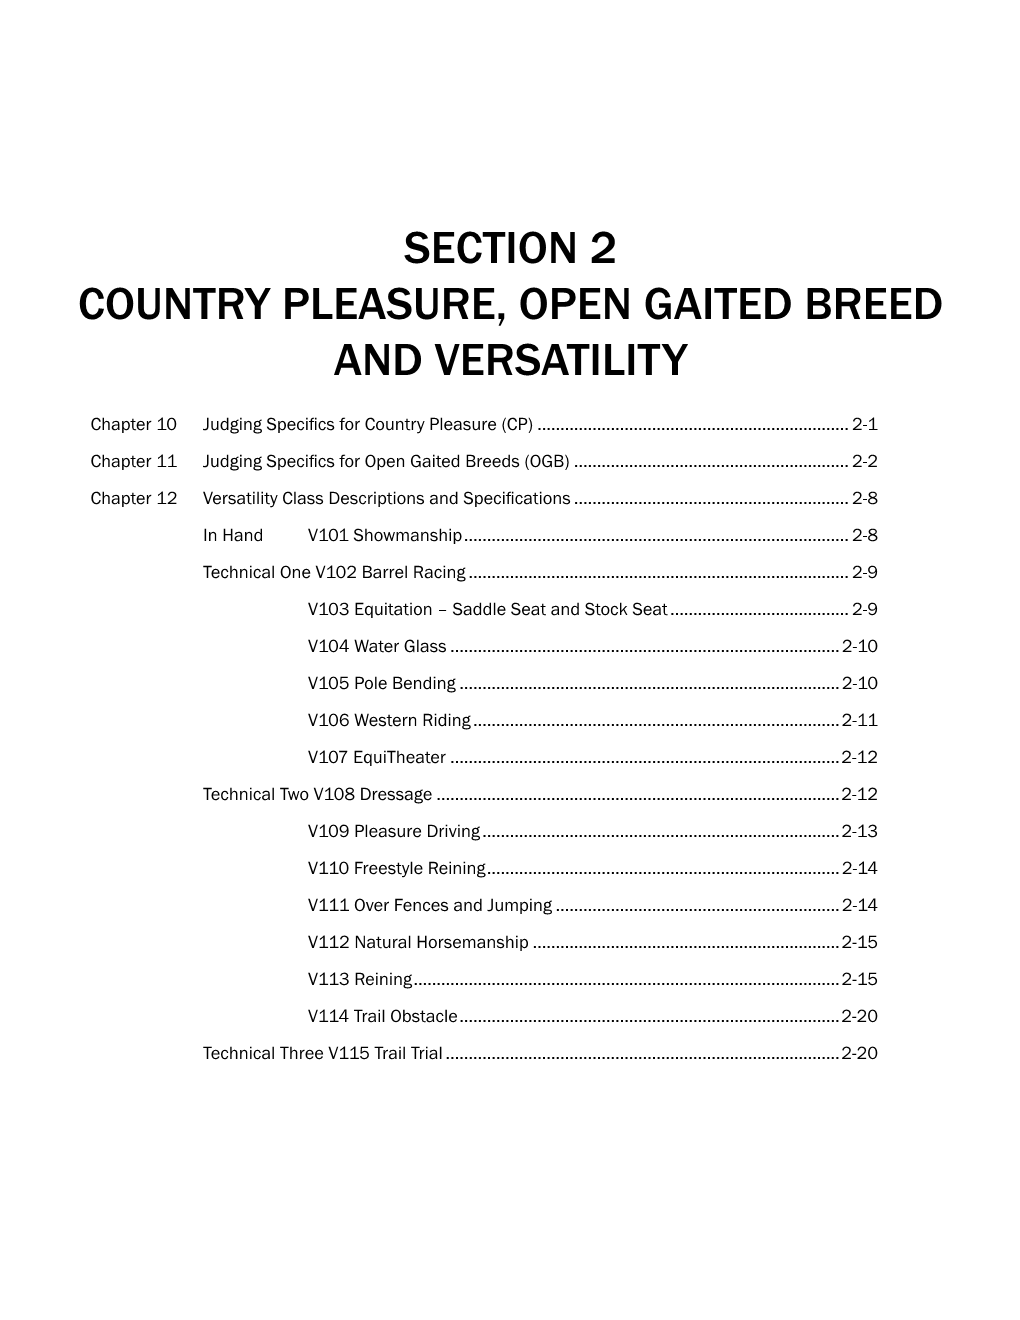 Section 2 Country Pleasure, Open Gaited Breed and Versatility